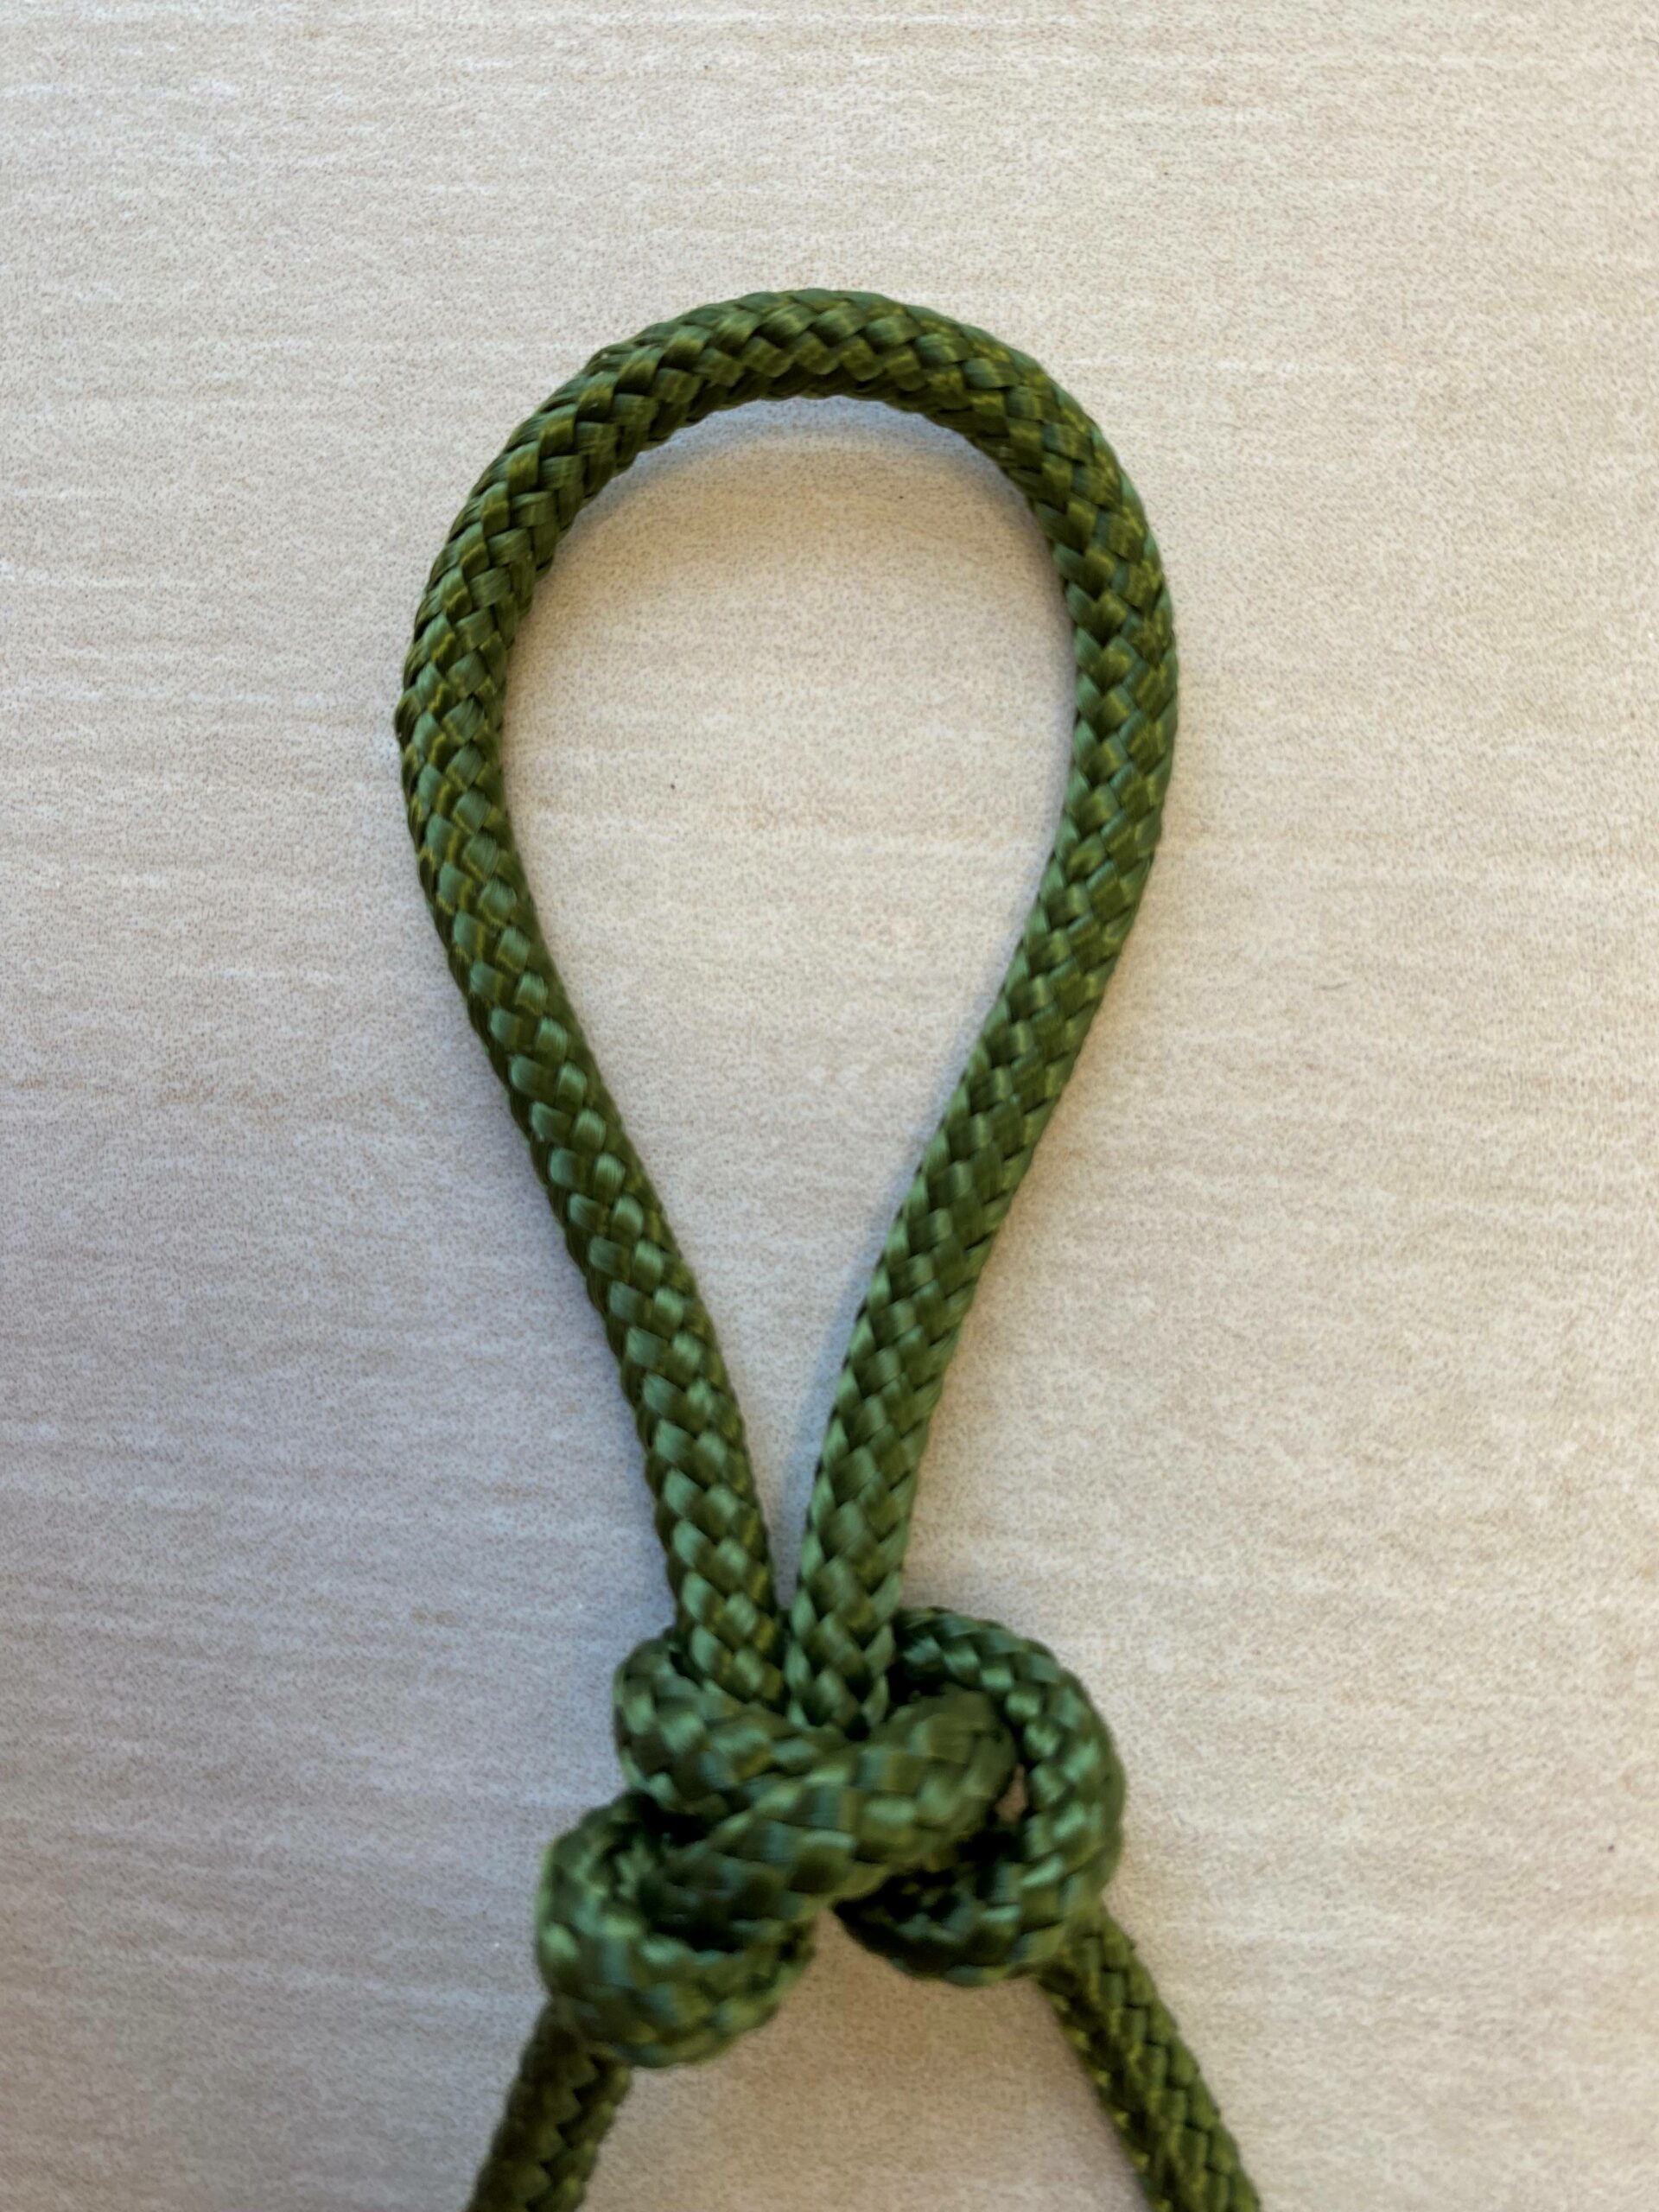 The Butterfly Knot